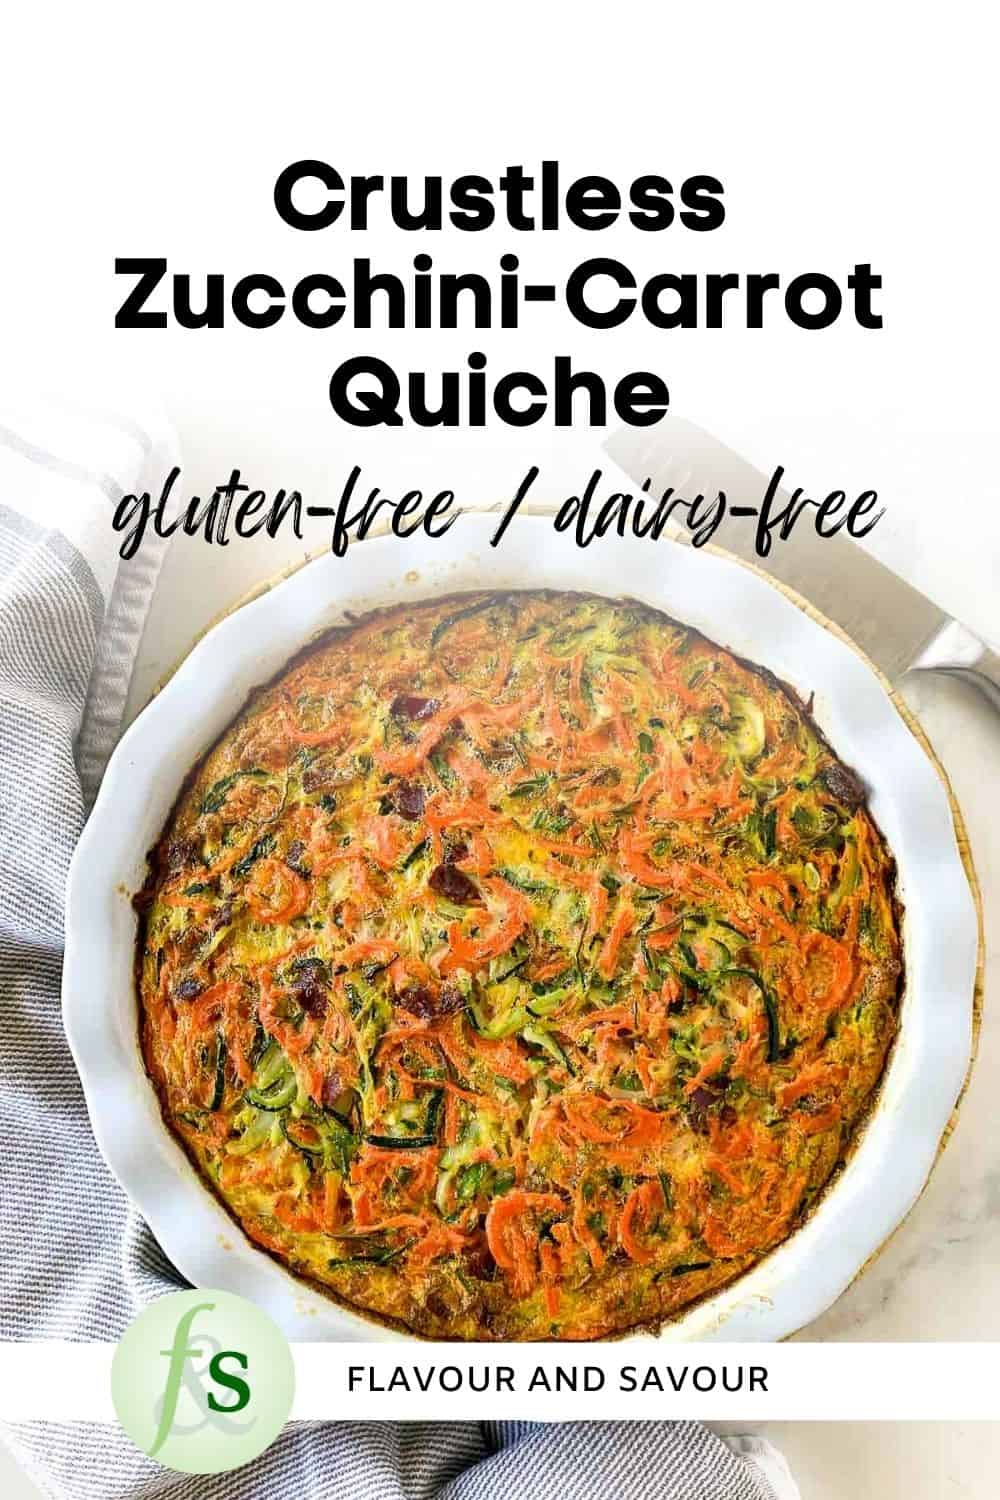 Image with text overlay for crustless zucchini-carrot quiche with bacon and herbs.